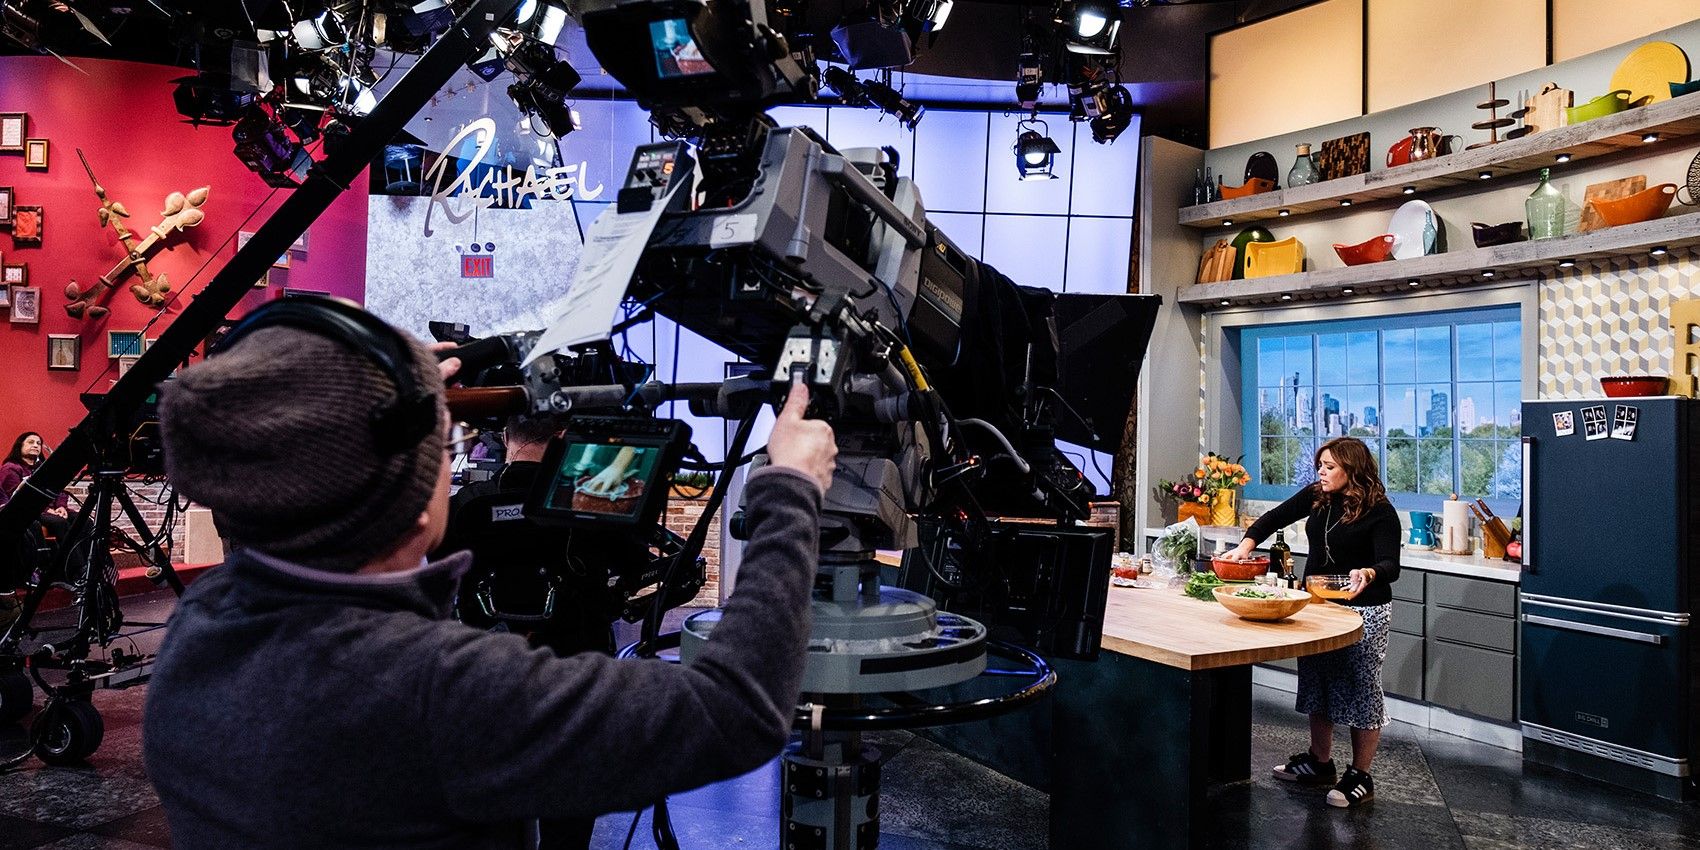 10 BehindTheScenes Secrets From The Rachael Ray Show